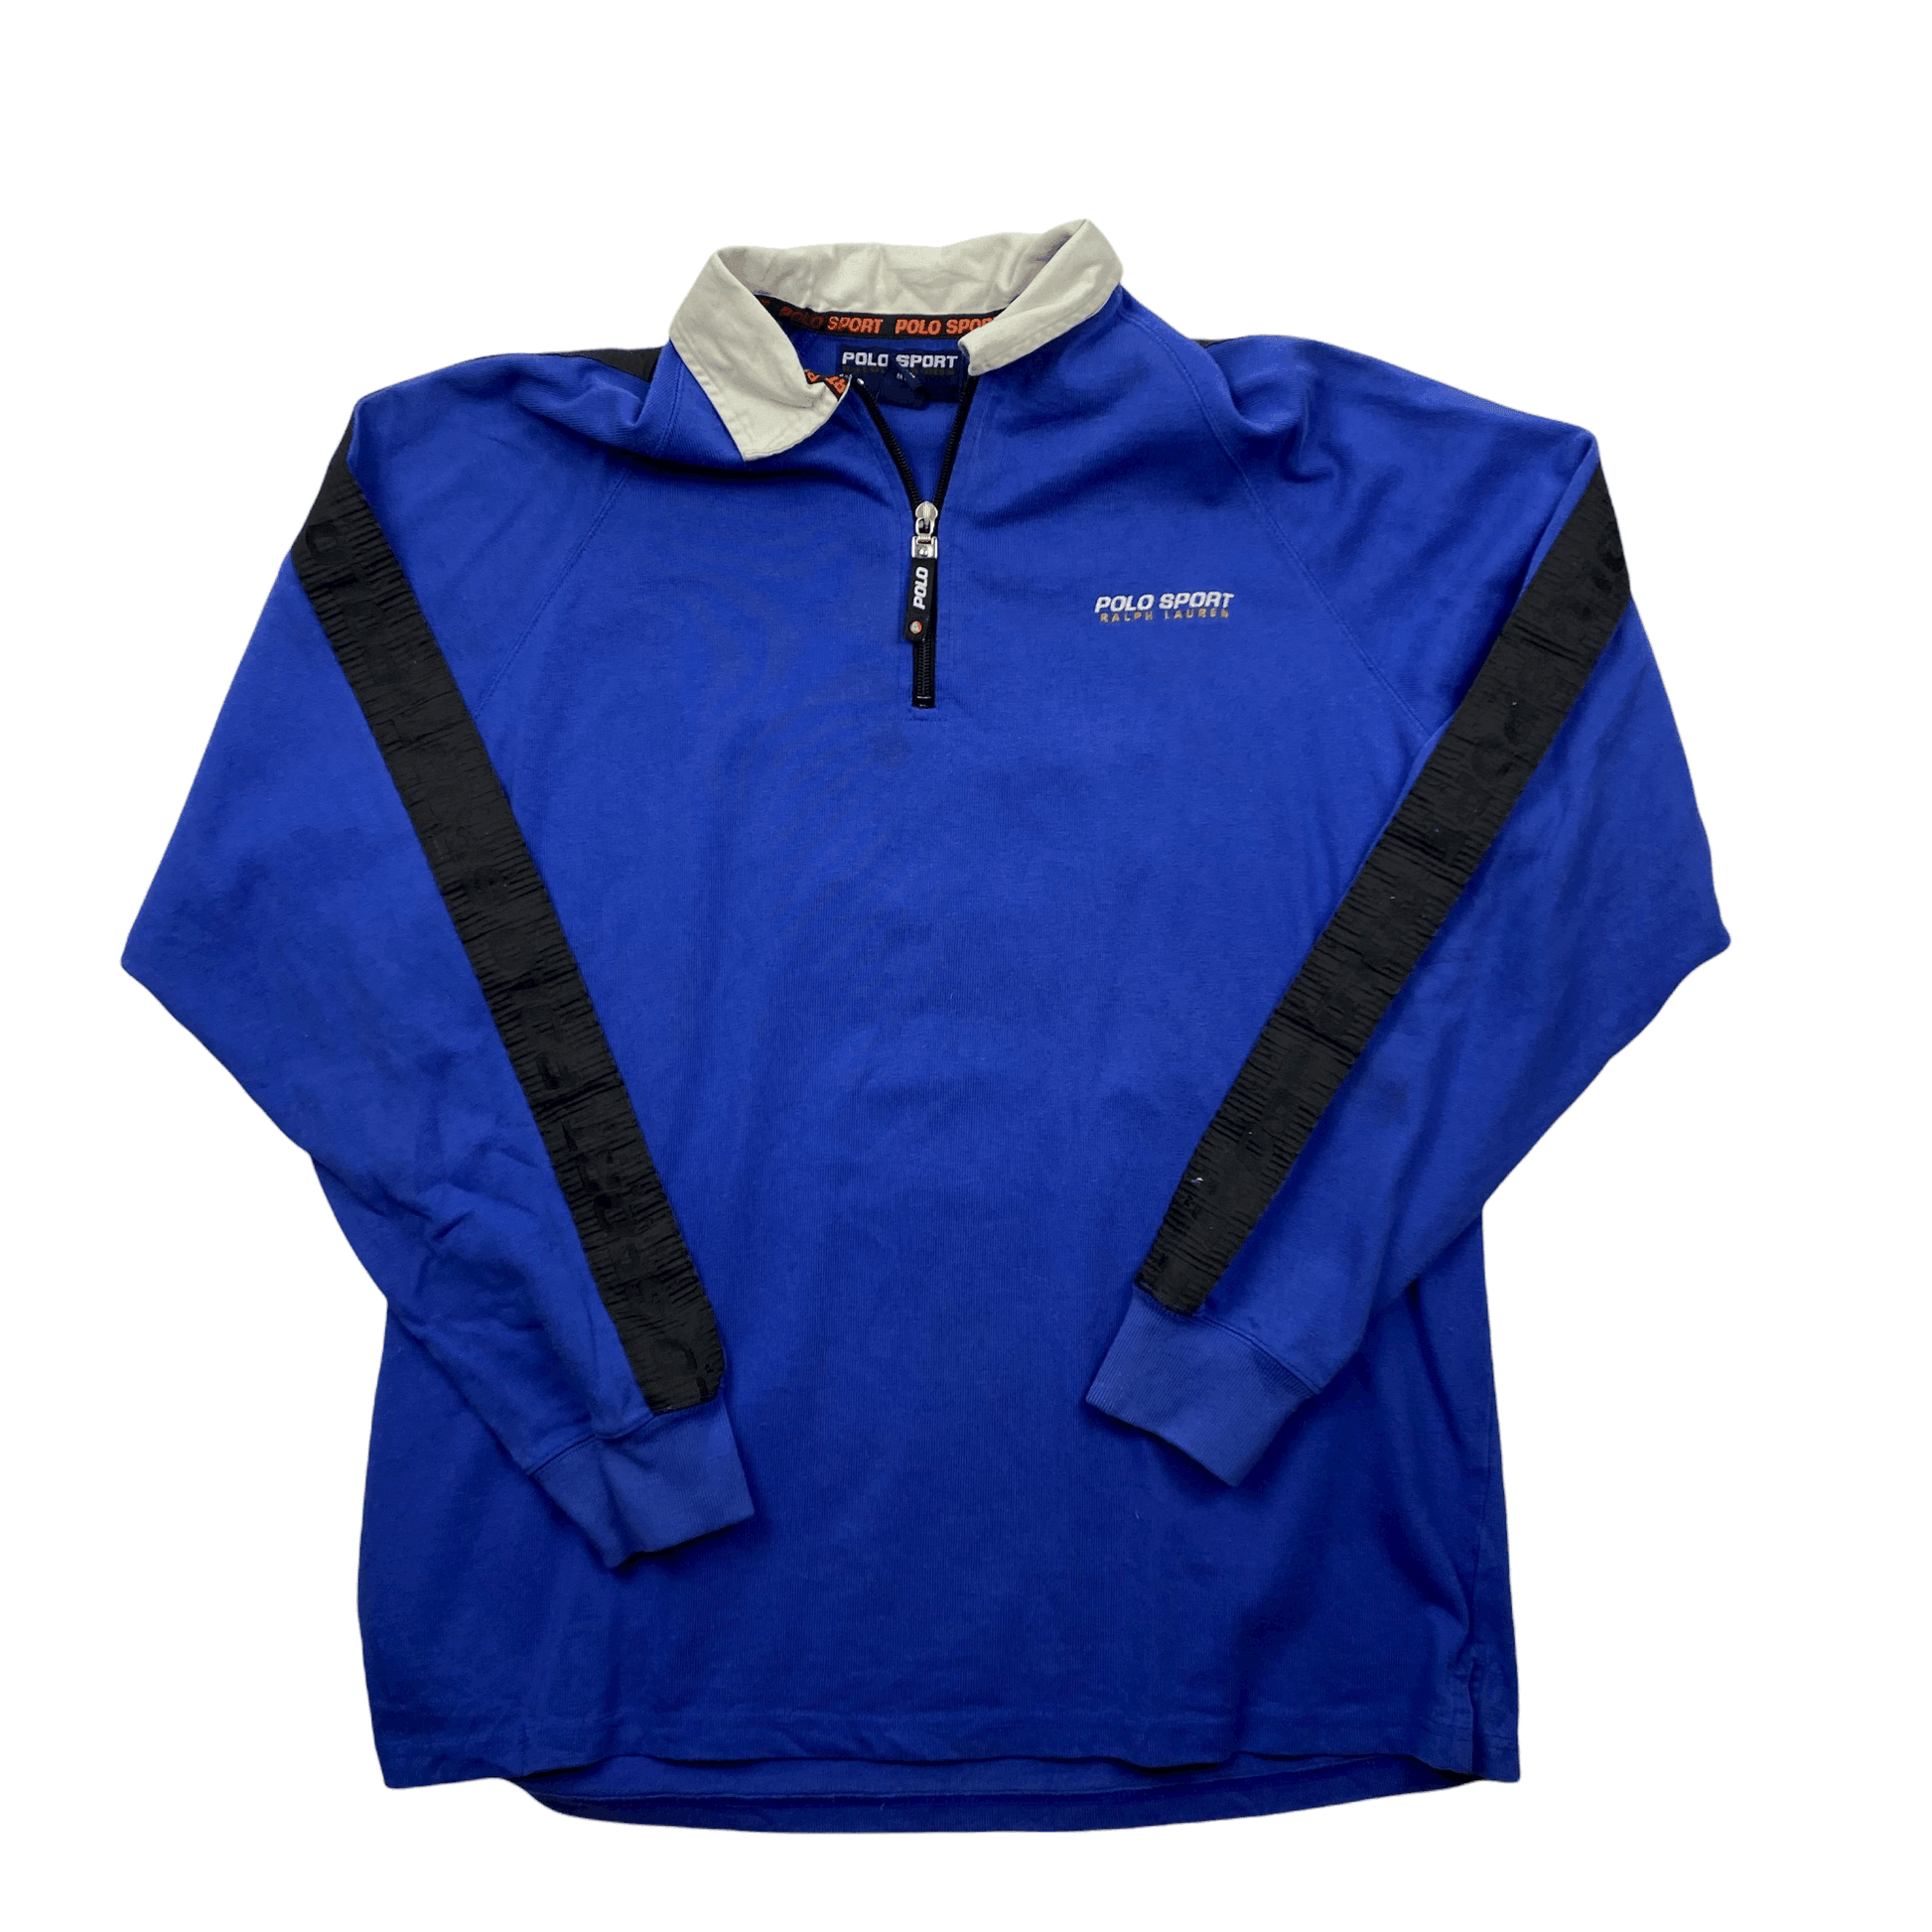 Vintage 90s Black + Blue Ralph Lauren Polo Sport Spell-Out Quarter Zip Polo Shirt - Extra Large - The Streetwear Studio